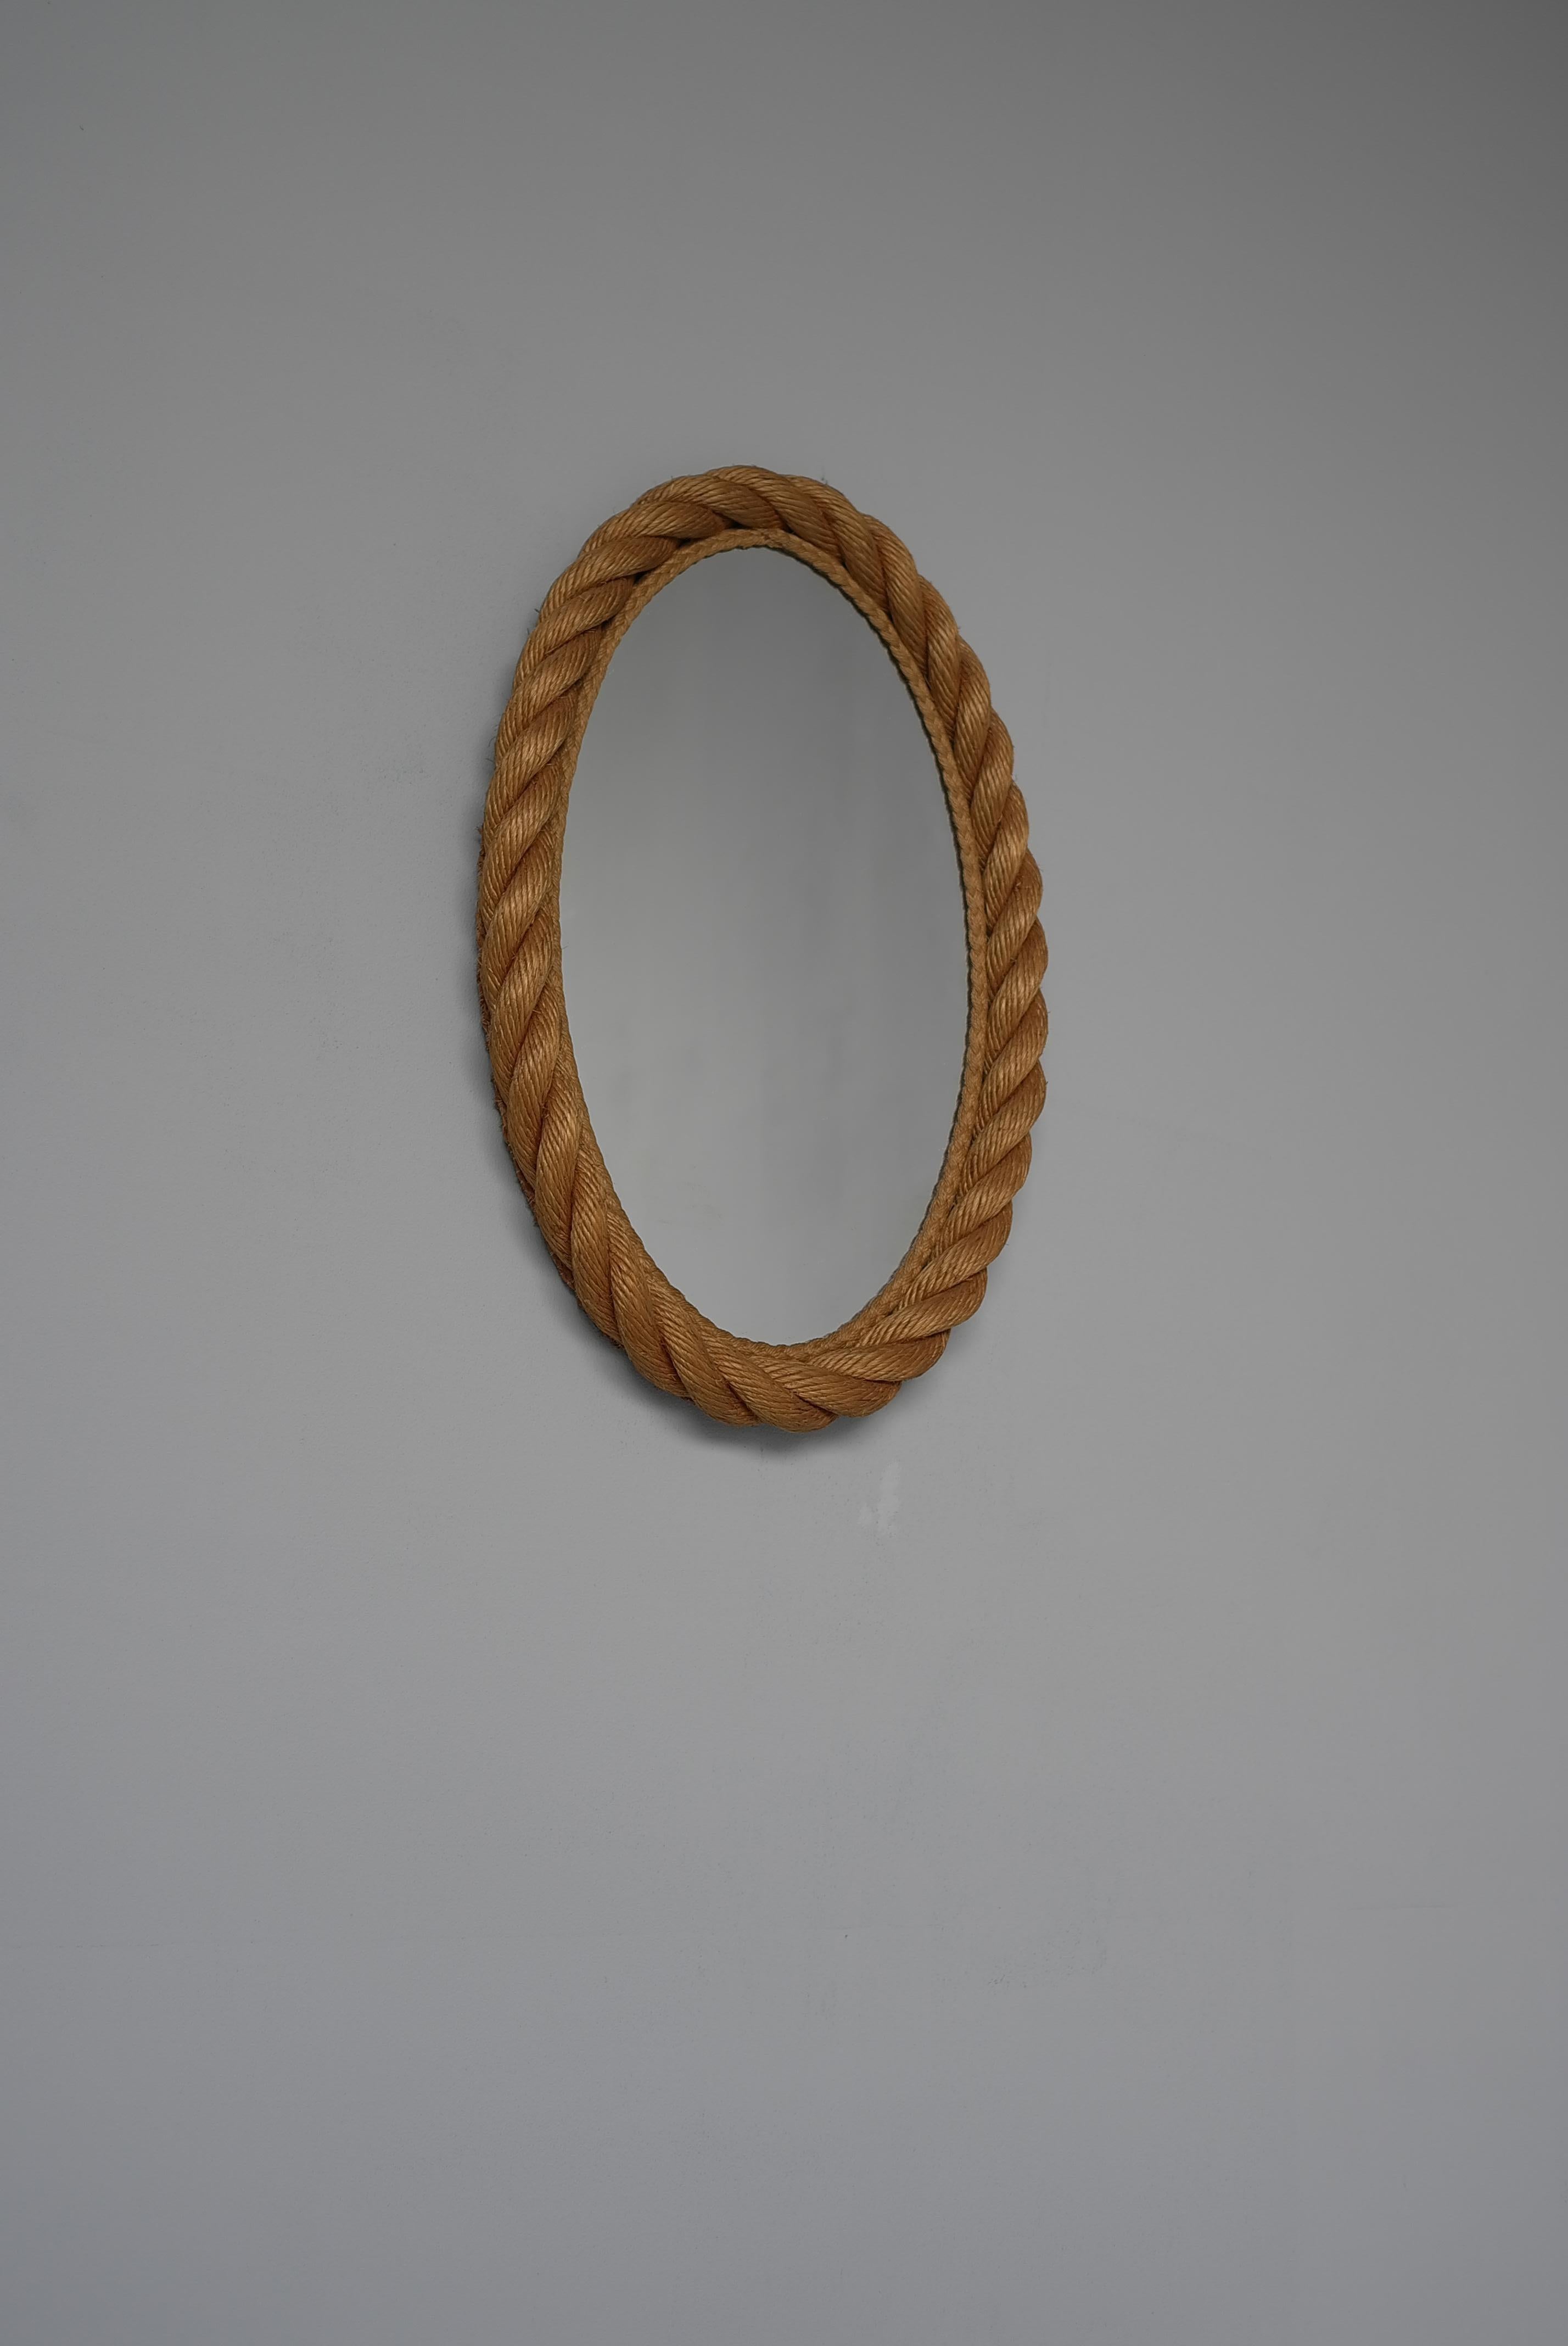 French Oval Rope Mirror by Adrien Audoux and Frida Minet, France, 1950s